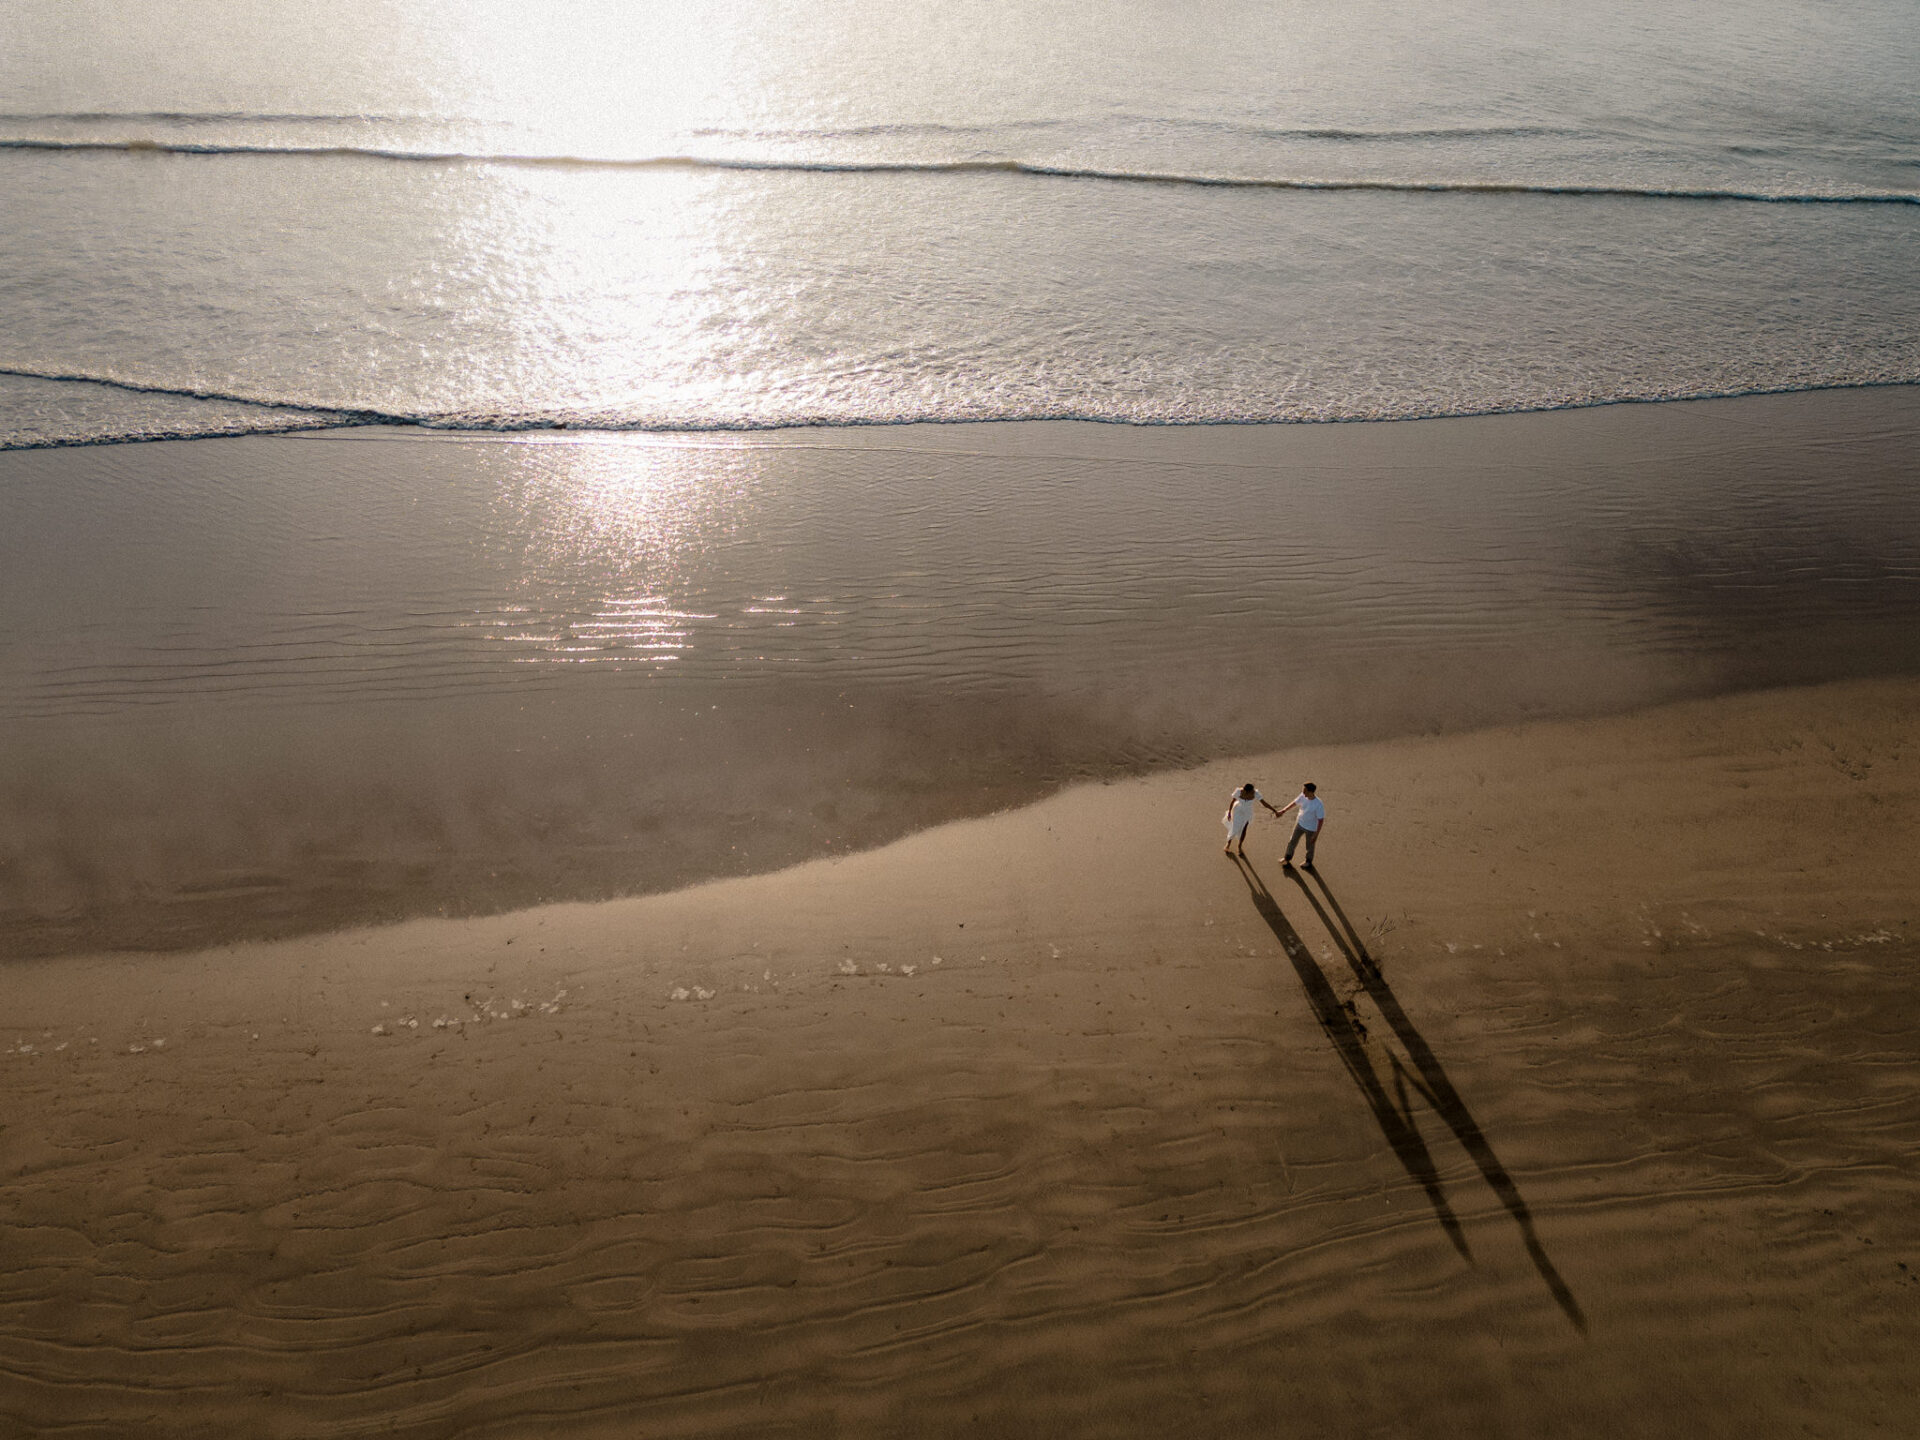 Two people walking on the beach at sunset.